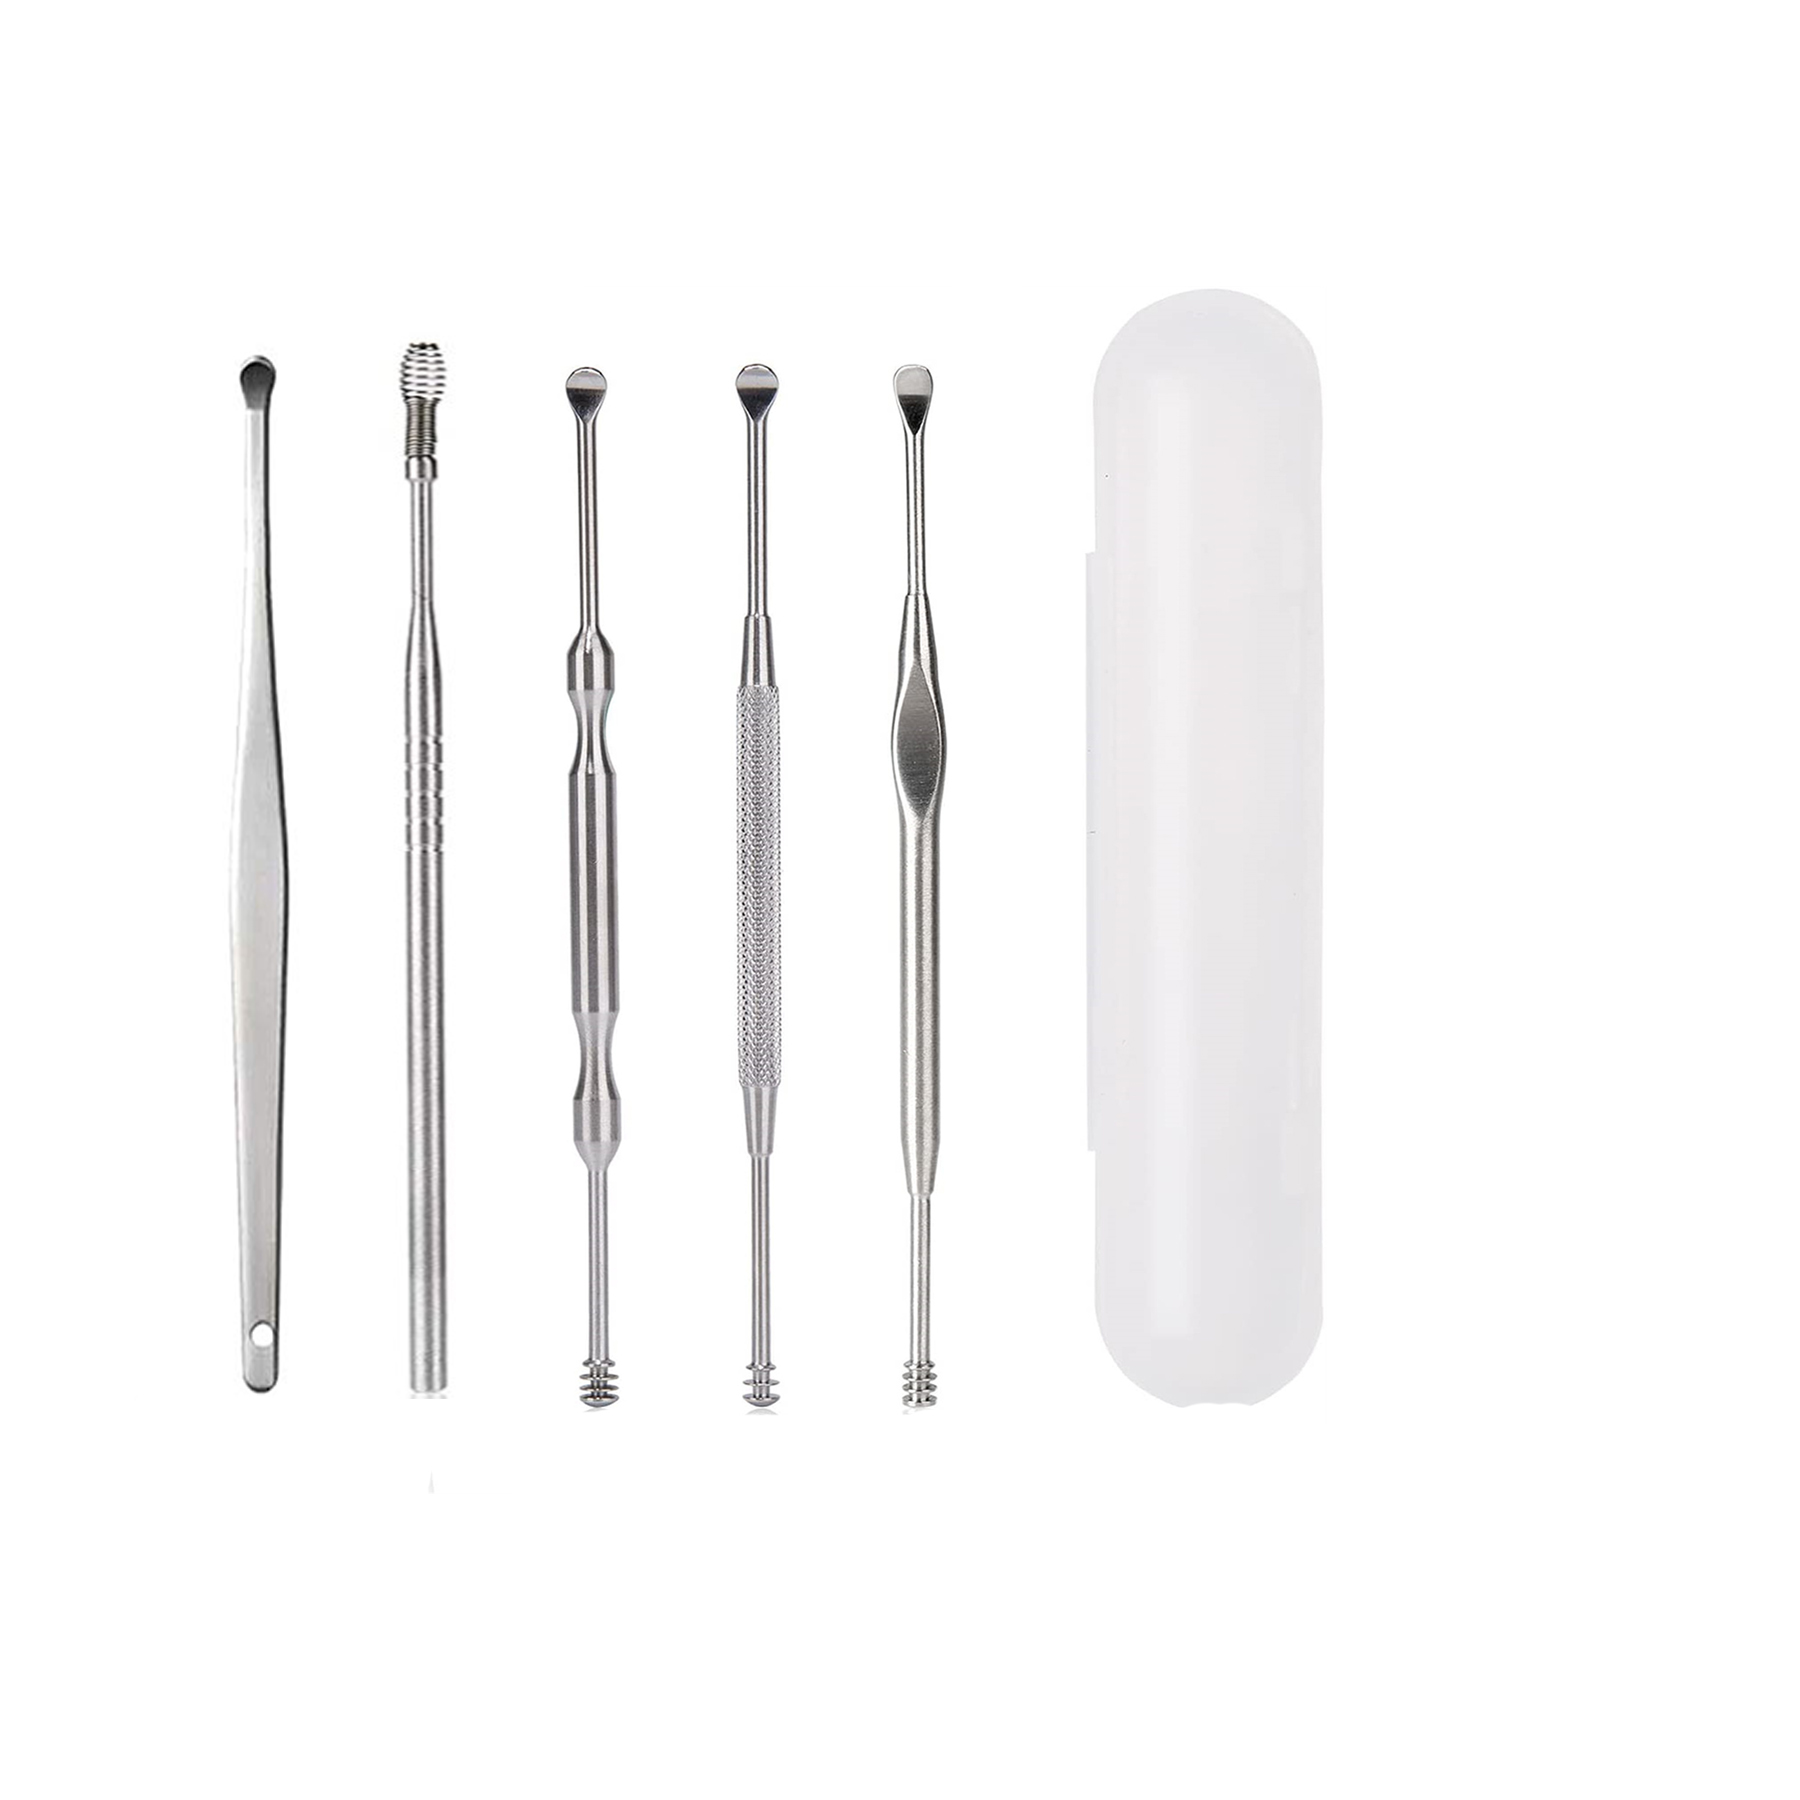 Stainless Steel Ear Pick Ear Cleaner with Storage Box 